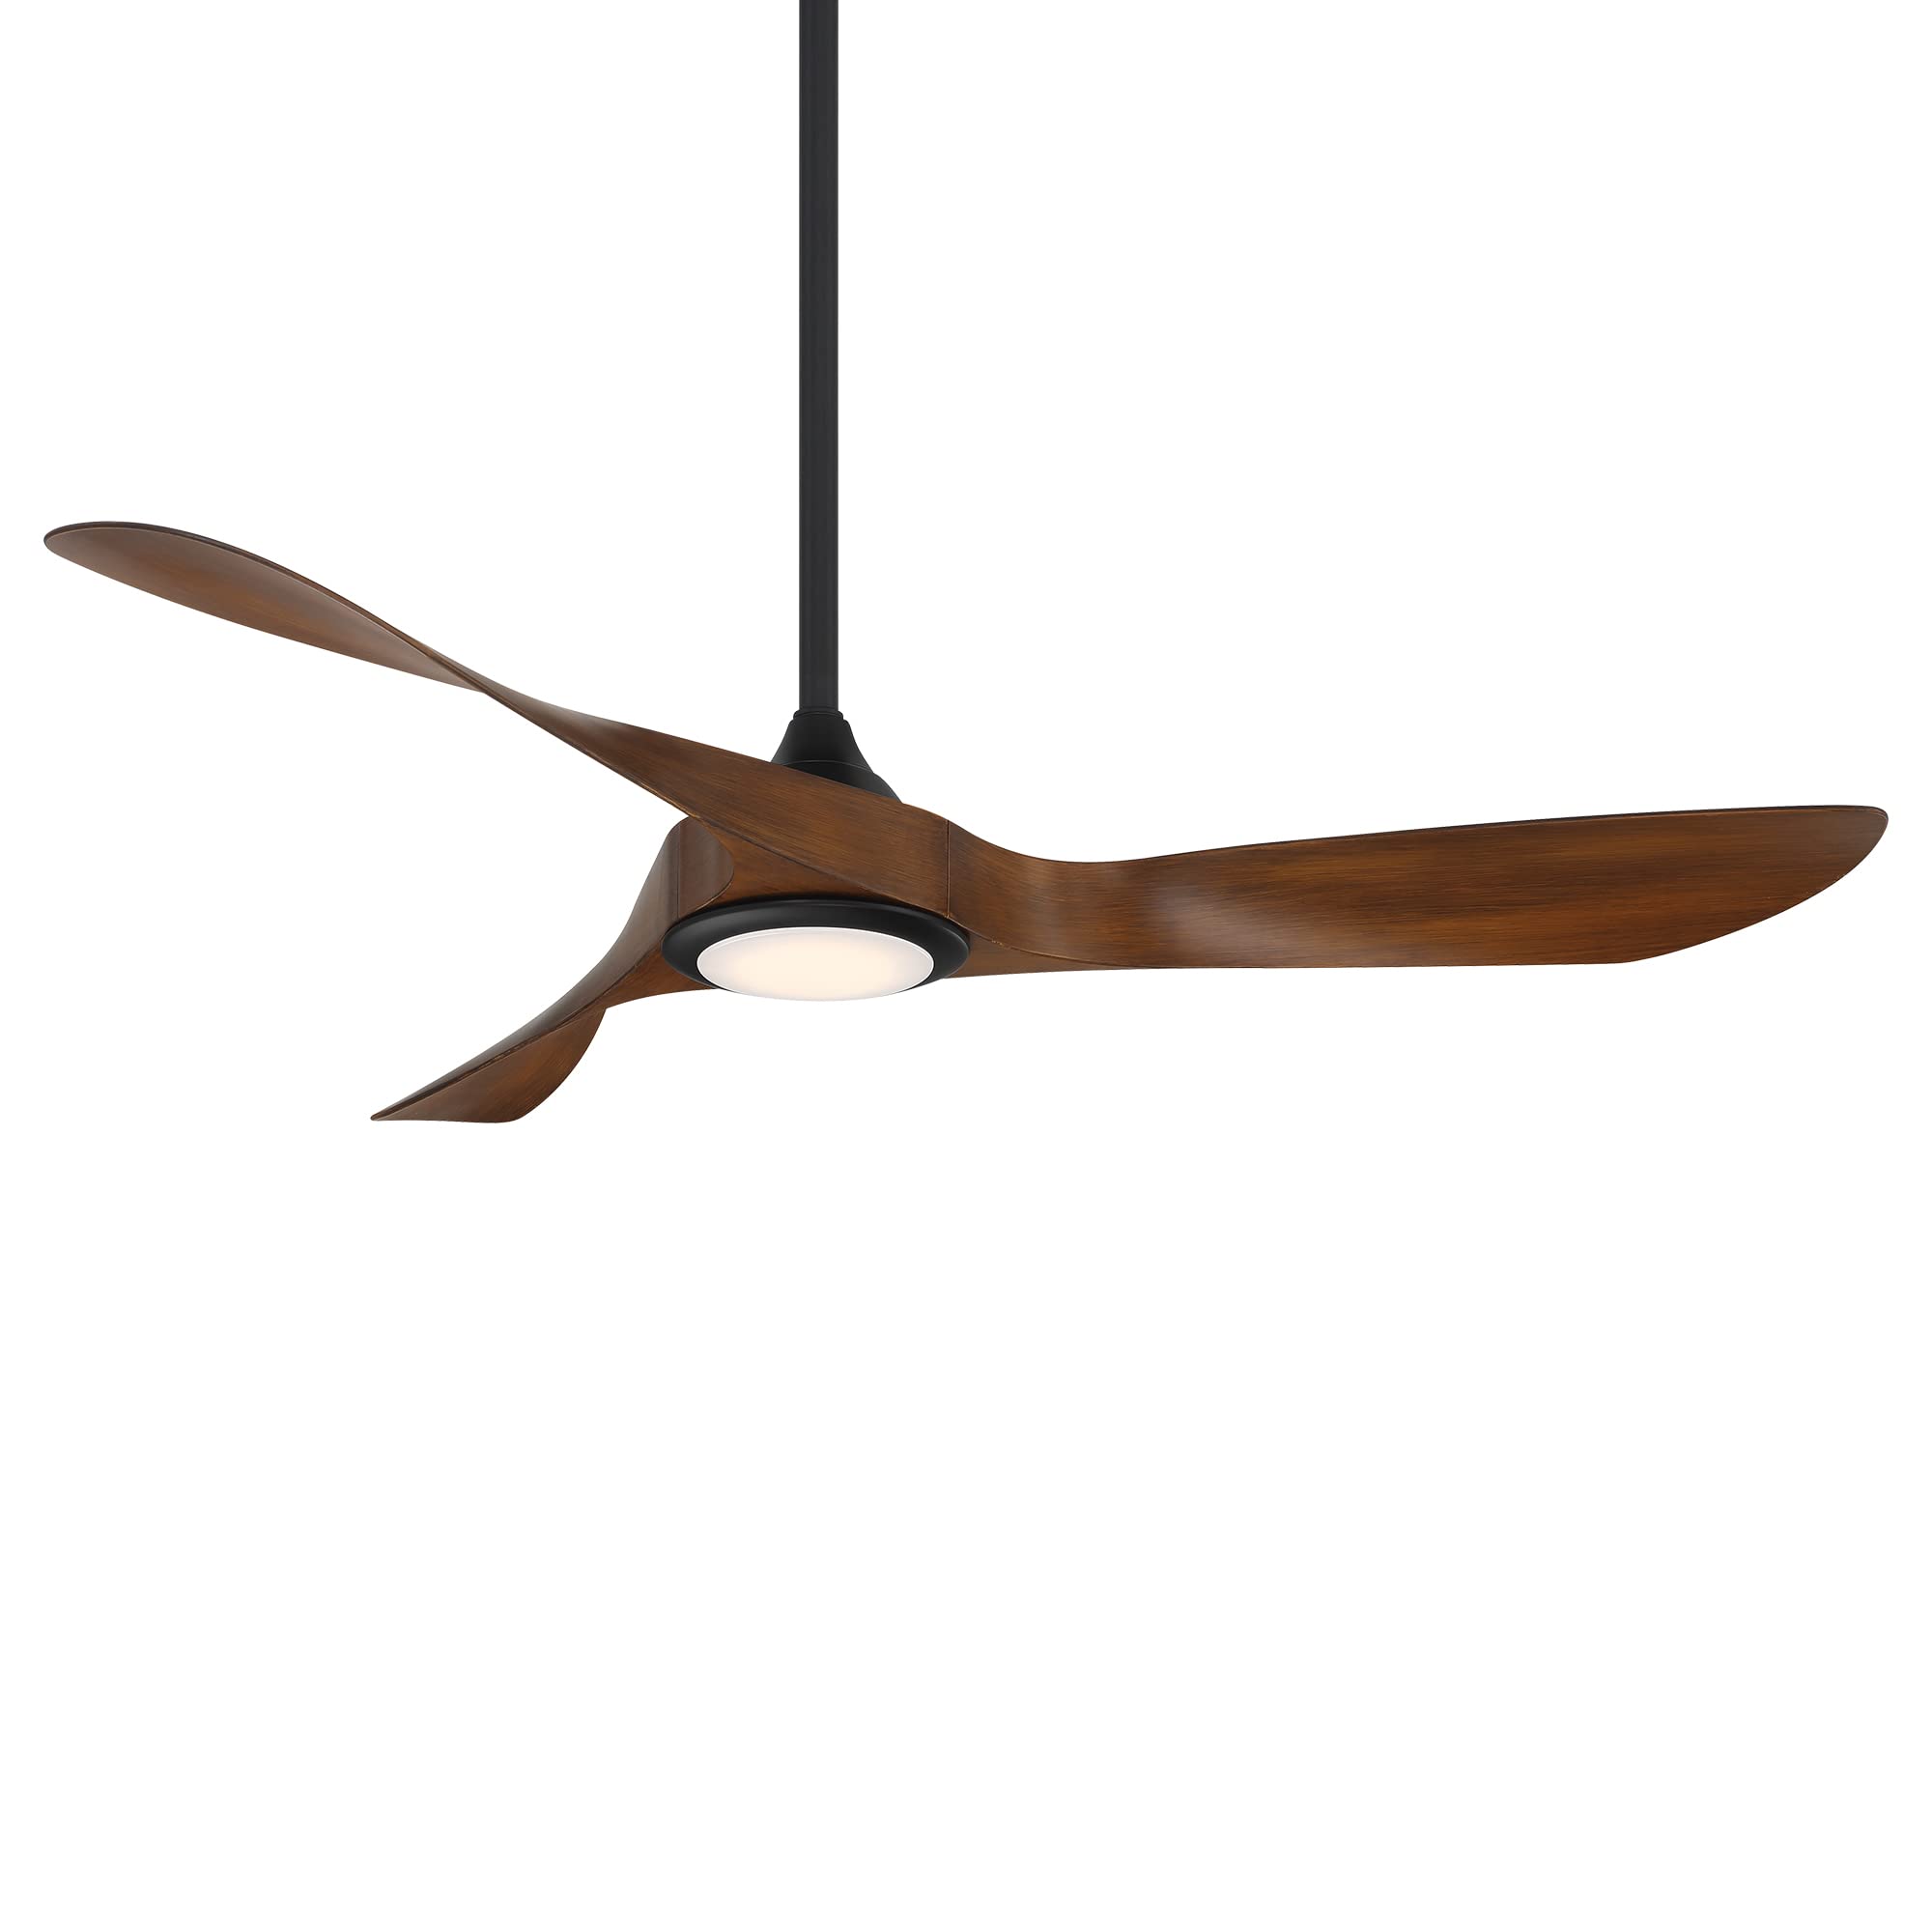 WAC Smart Fans Swirl Indoor and Outdoor 3-Blade Ceiling Fan 54in Matte Black Koa with 3000K LED Light Kit and Remote Control works with Alexa and iOS or Android App Matte Black Distressed Koa